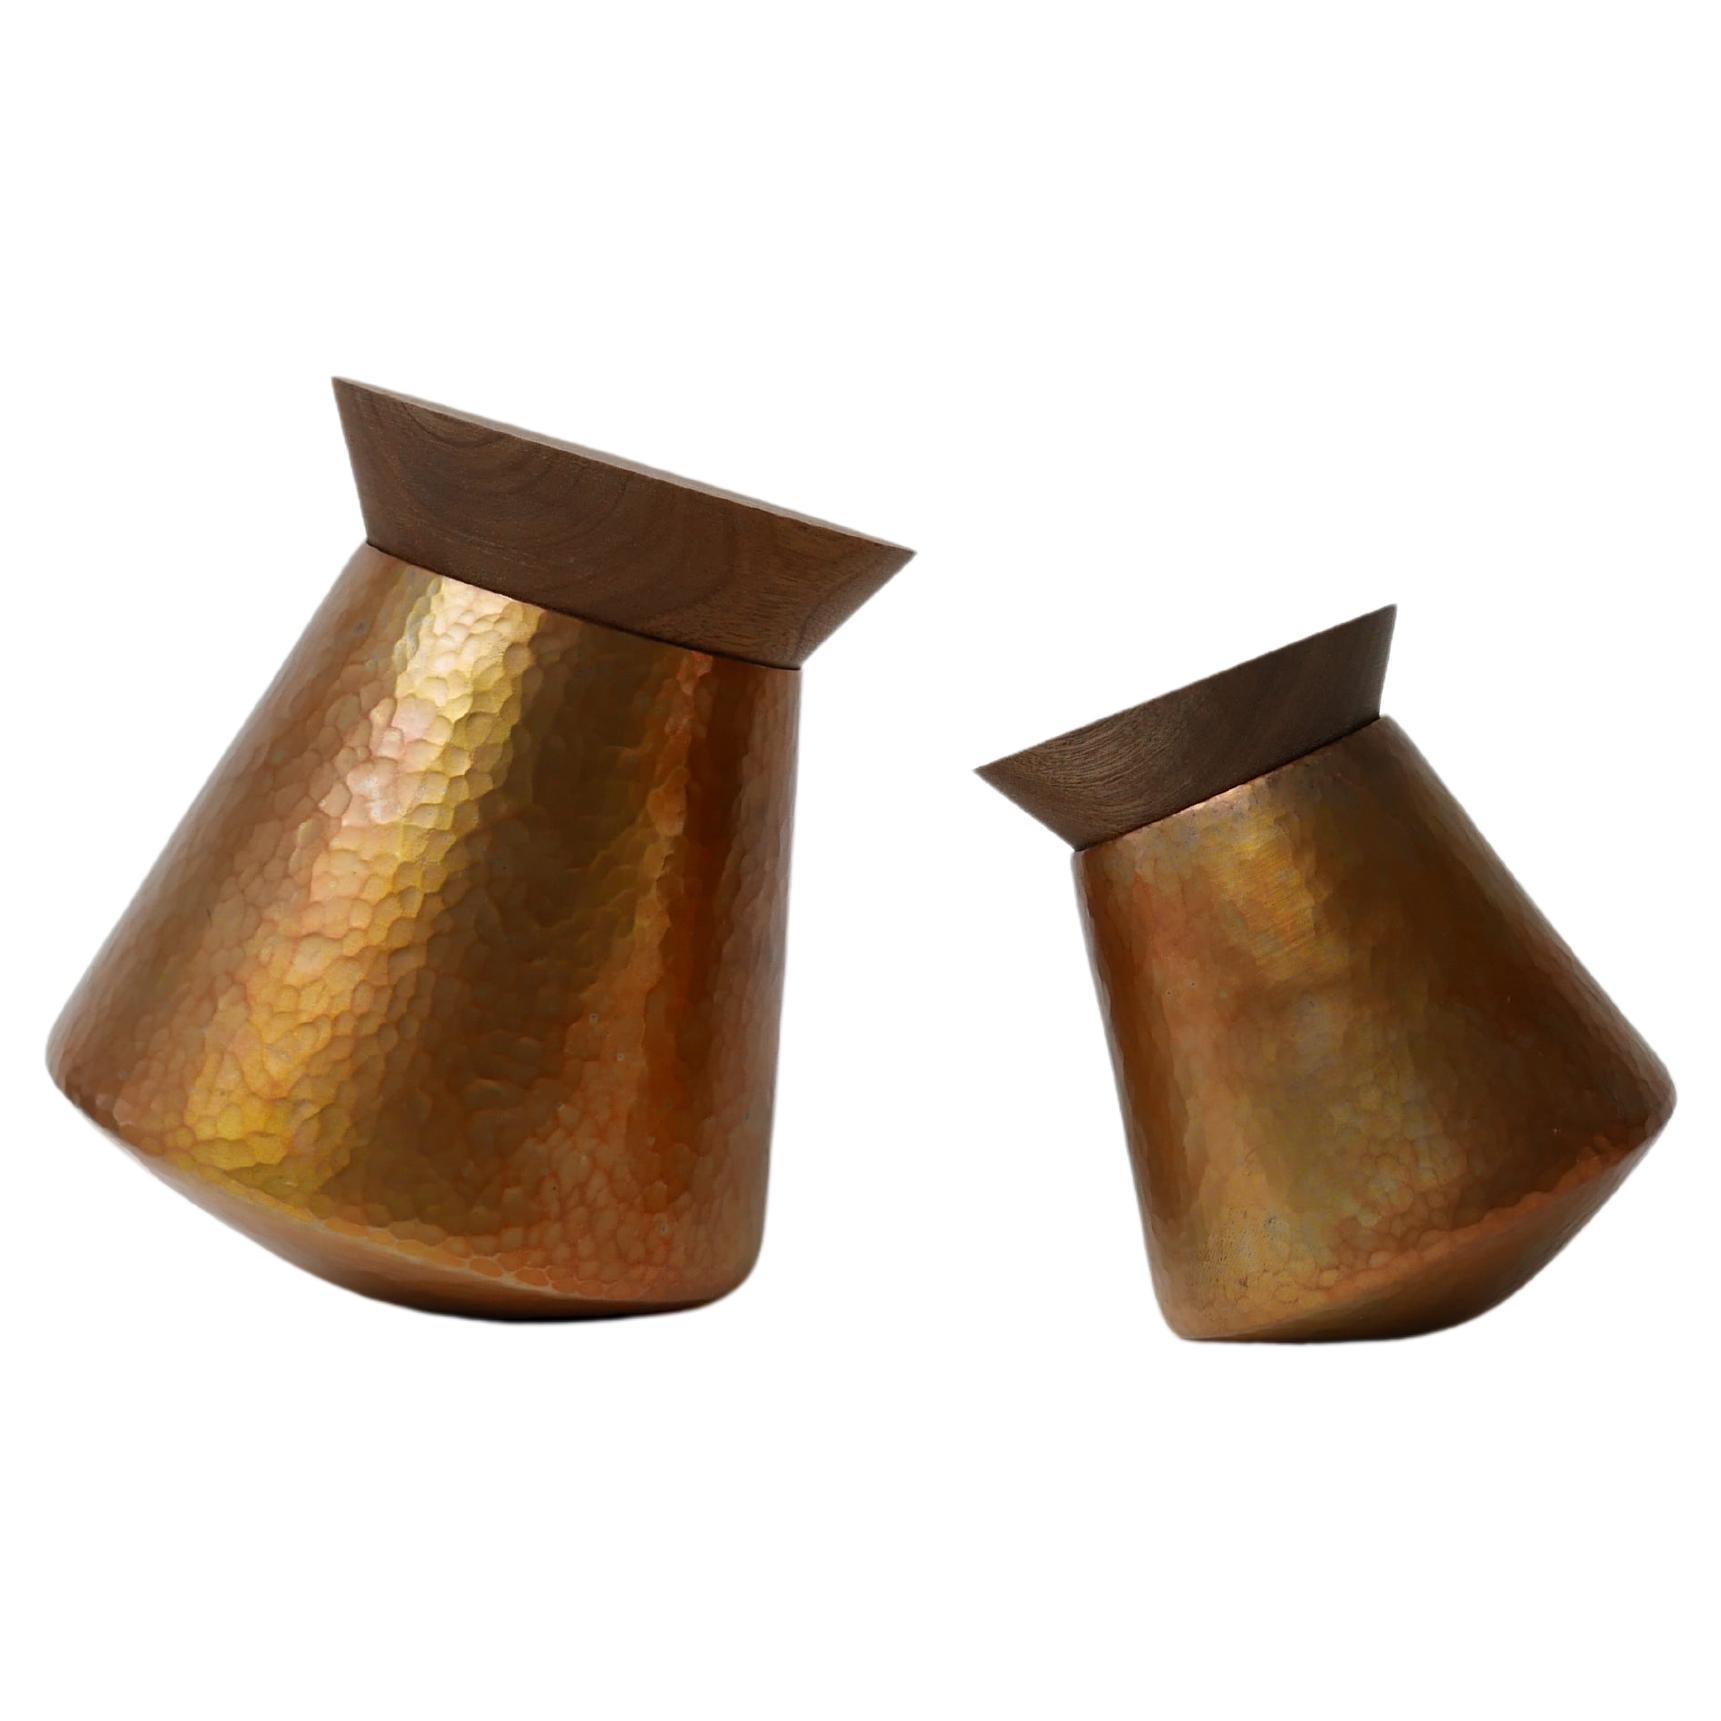 Set of Hammered Copper Containers with Brass Finish and Rosamorada Wood Lid For Sale